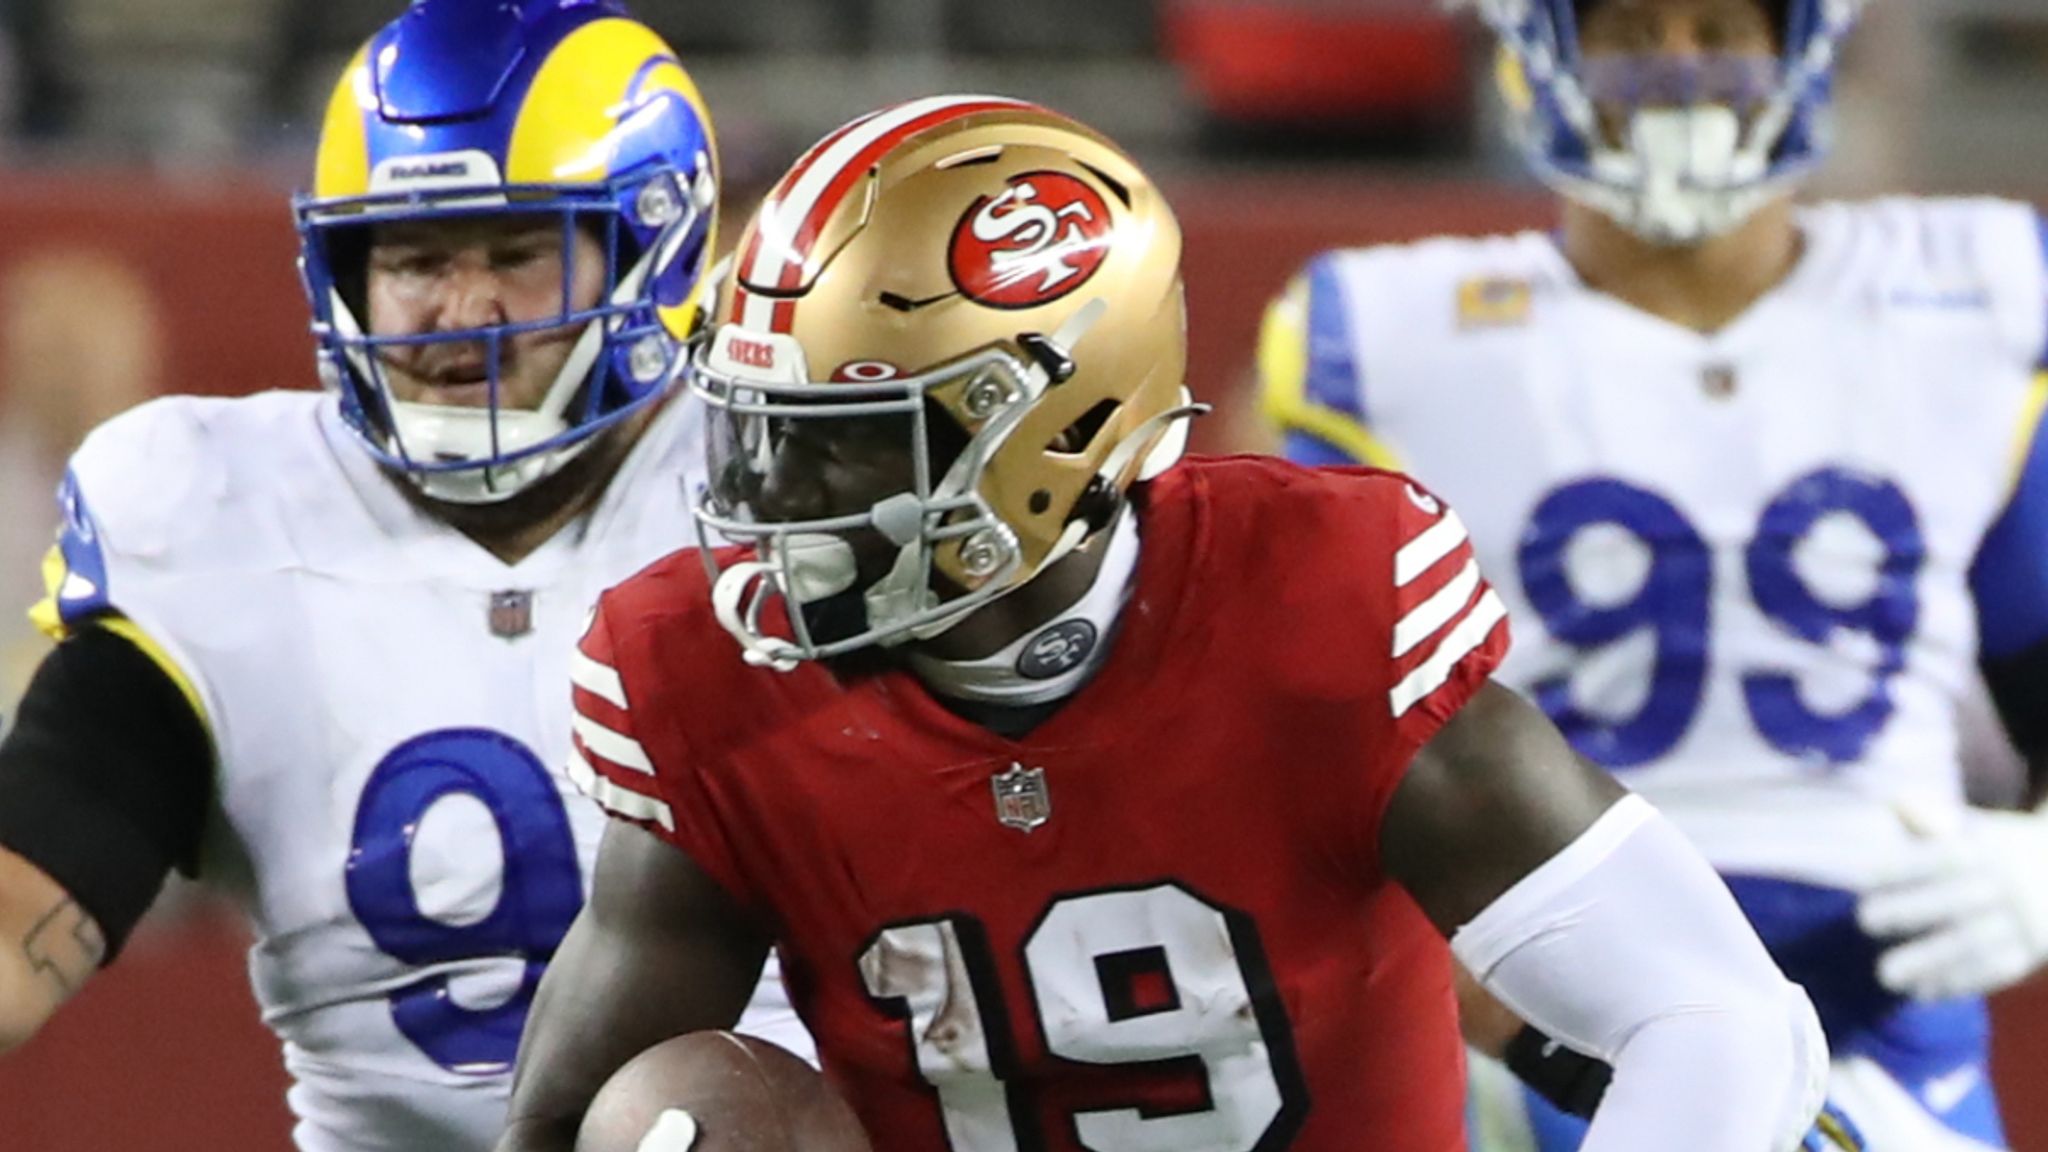 49ers vs. Rams score: Los Angeles returns to Super Bowl with close win